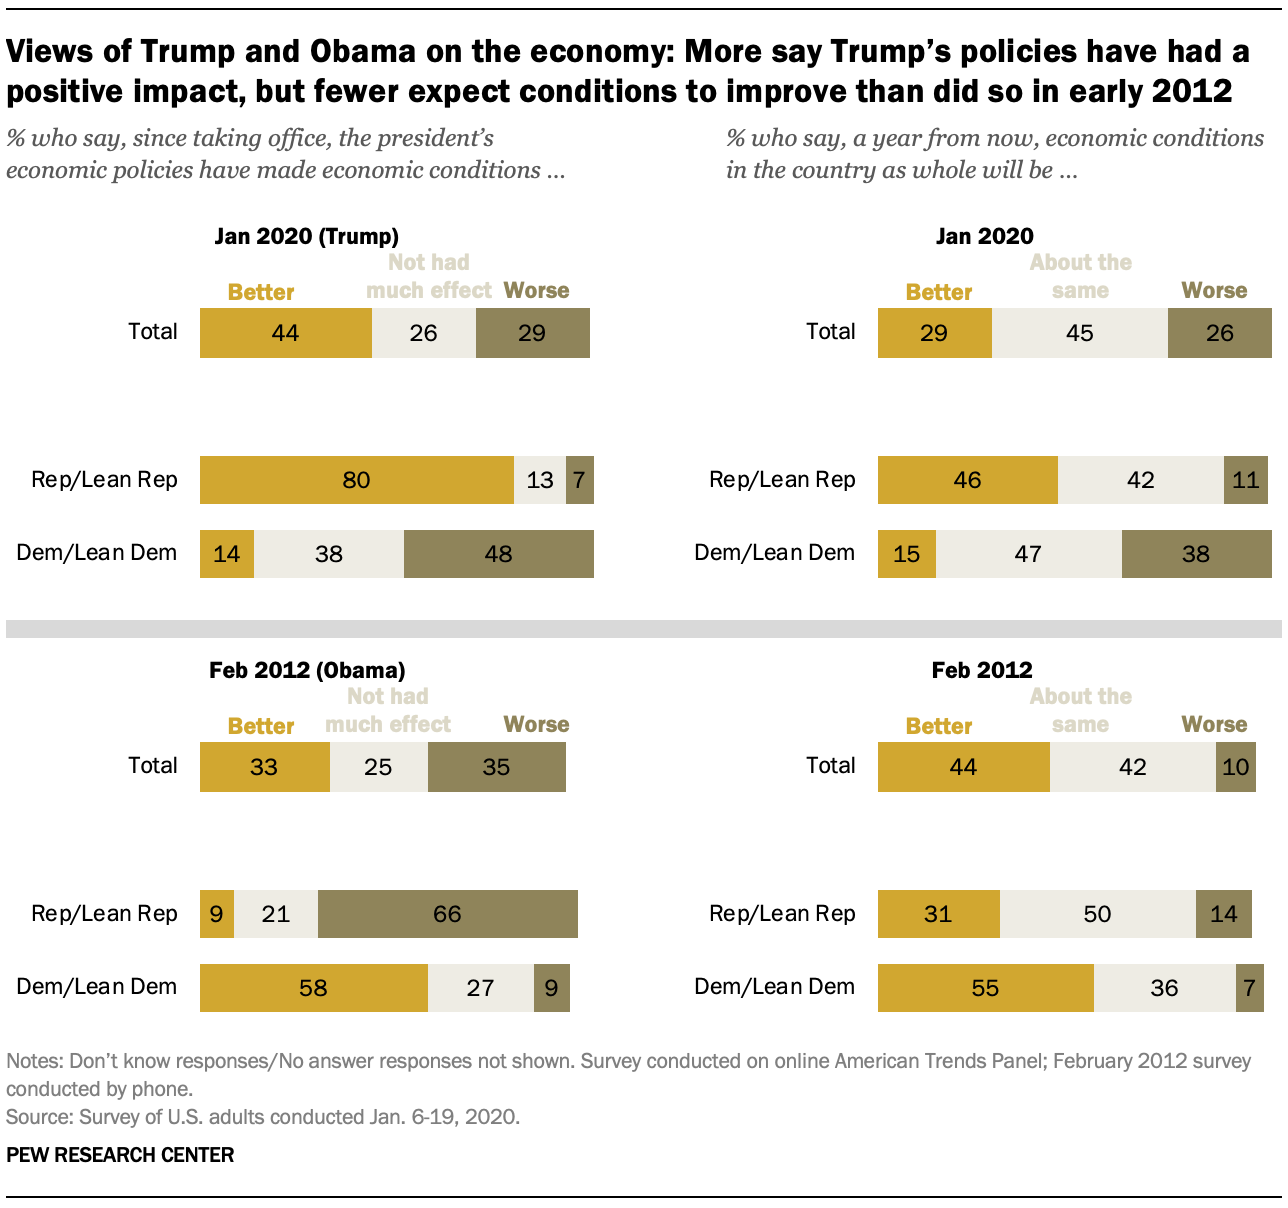 Views of Trump and Obama on the economy: More say Trump’s policies have had a positive impact, but fewer expect conditions to improve than did so in early 2012